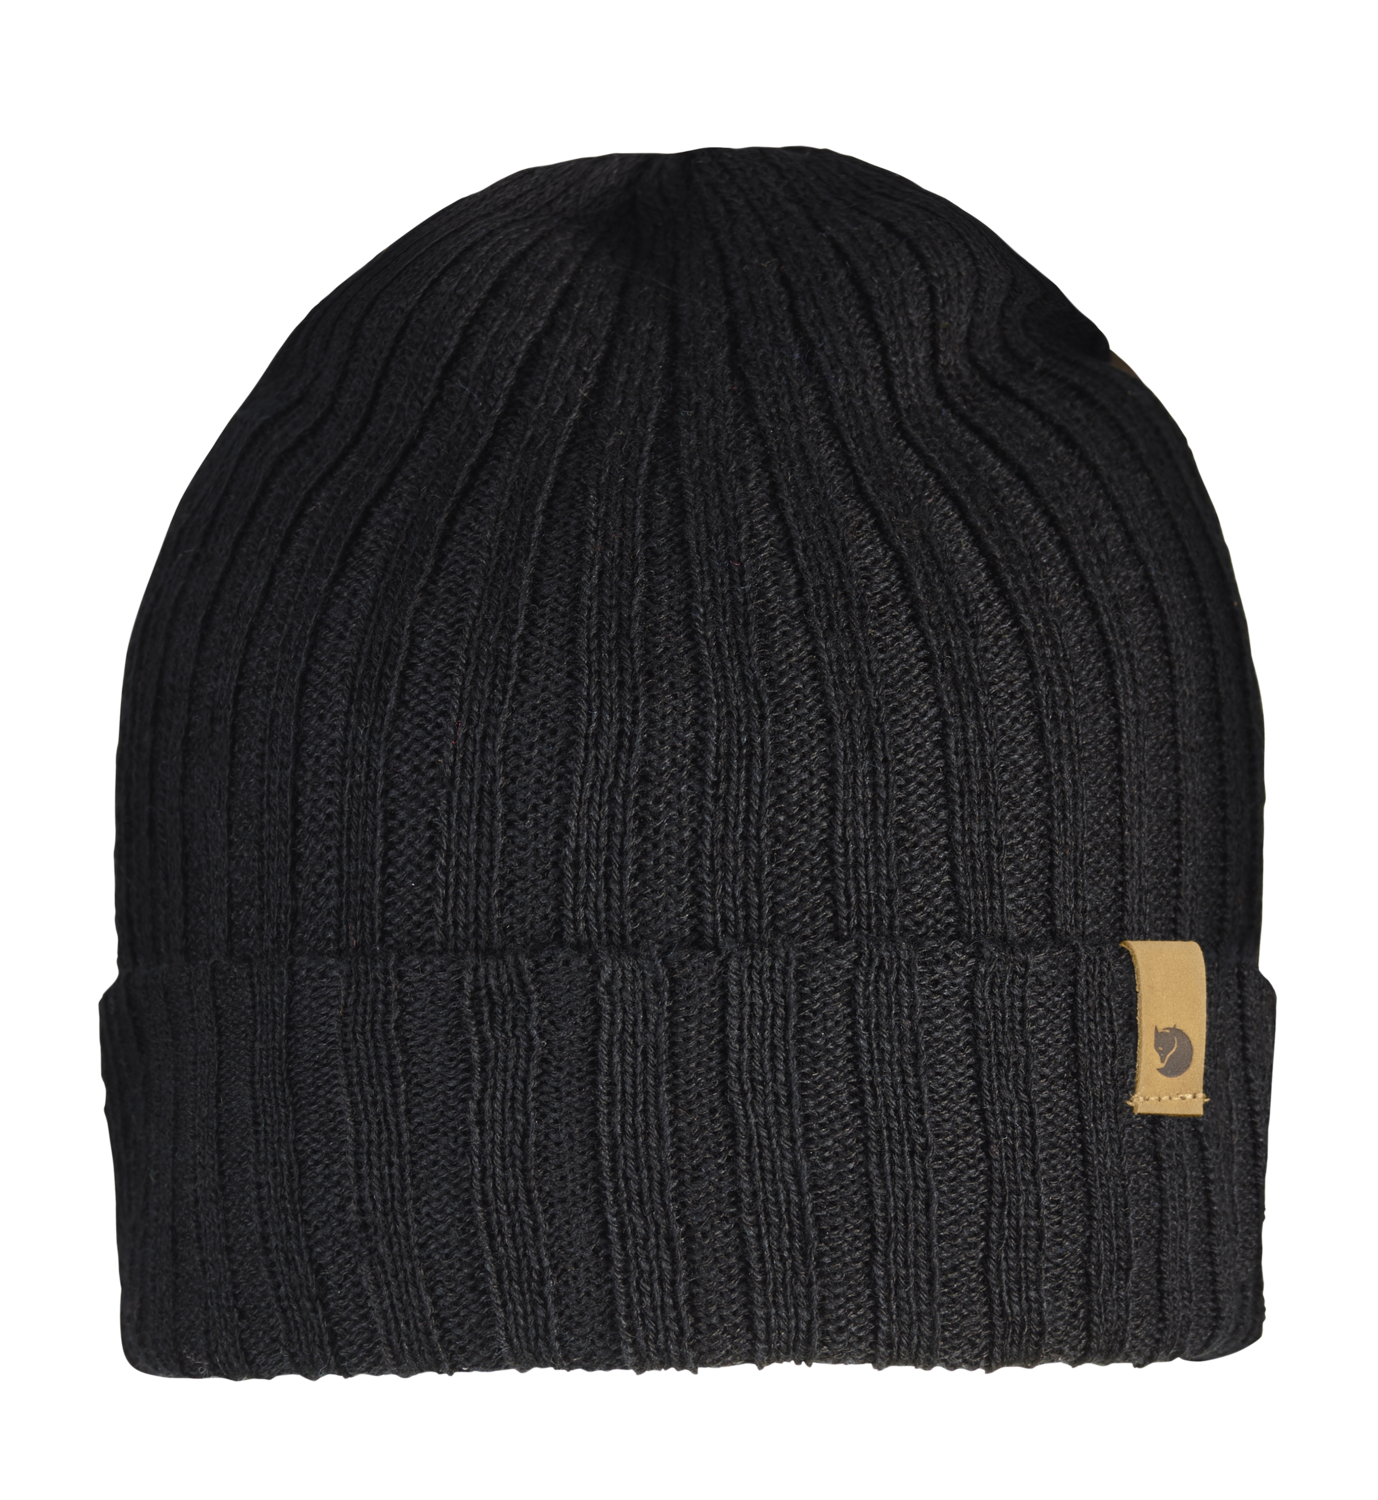 branded black winter cap for cold weather